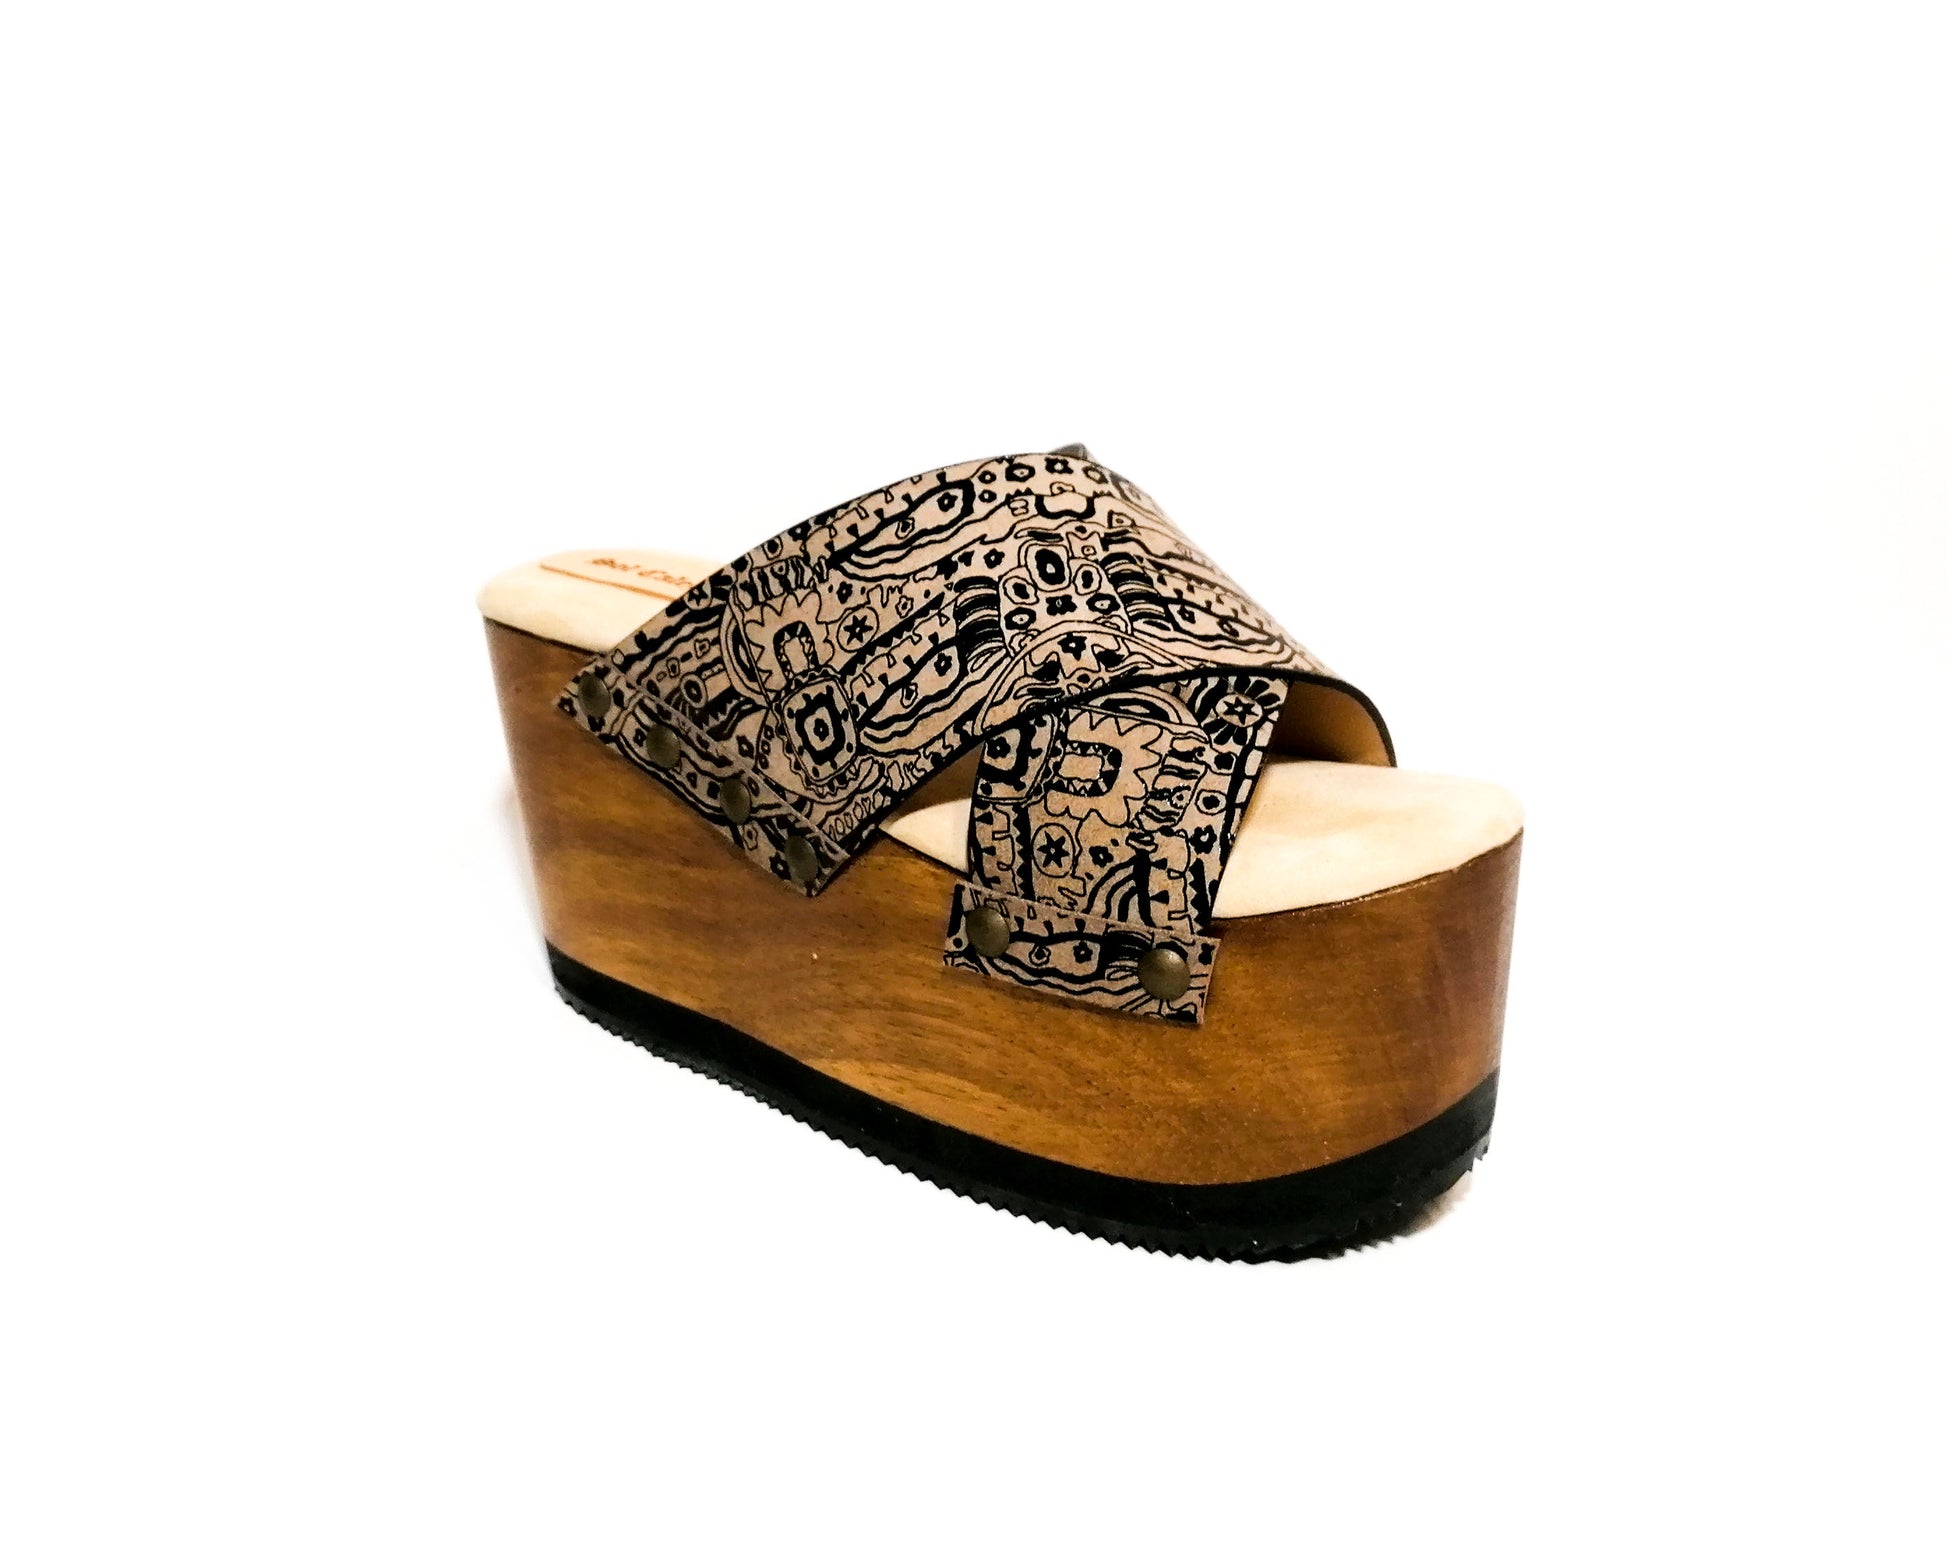 Ethnic leather platform clog sandal in vintage style. Vintage style wooden wedge sandal. Vintage style platform sandal 90's. Sizes from 34 to 47. Sizes 34 to 47. High quality leather shoes handmade by sol Caleyo. Sustainable fashion.